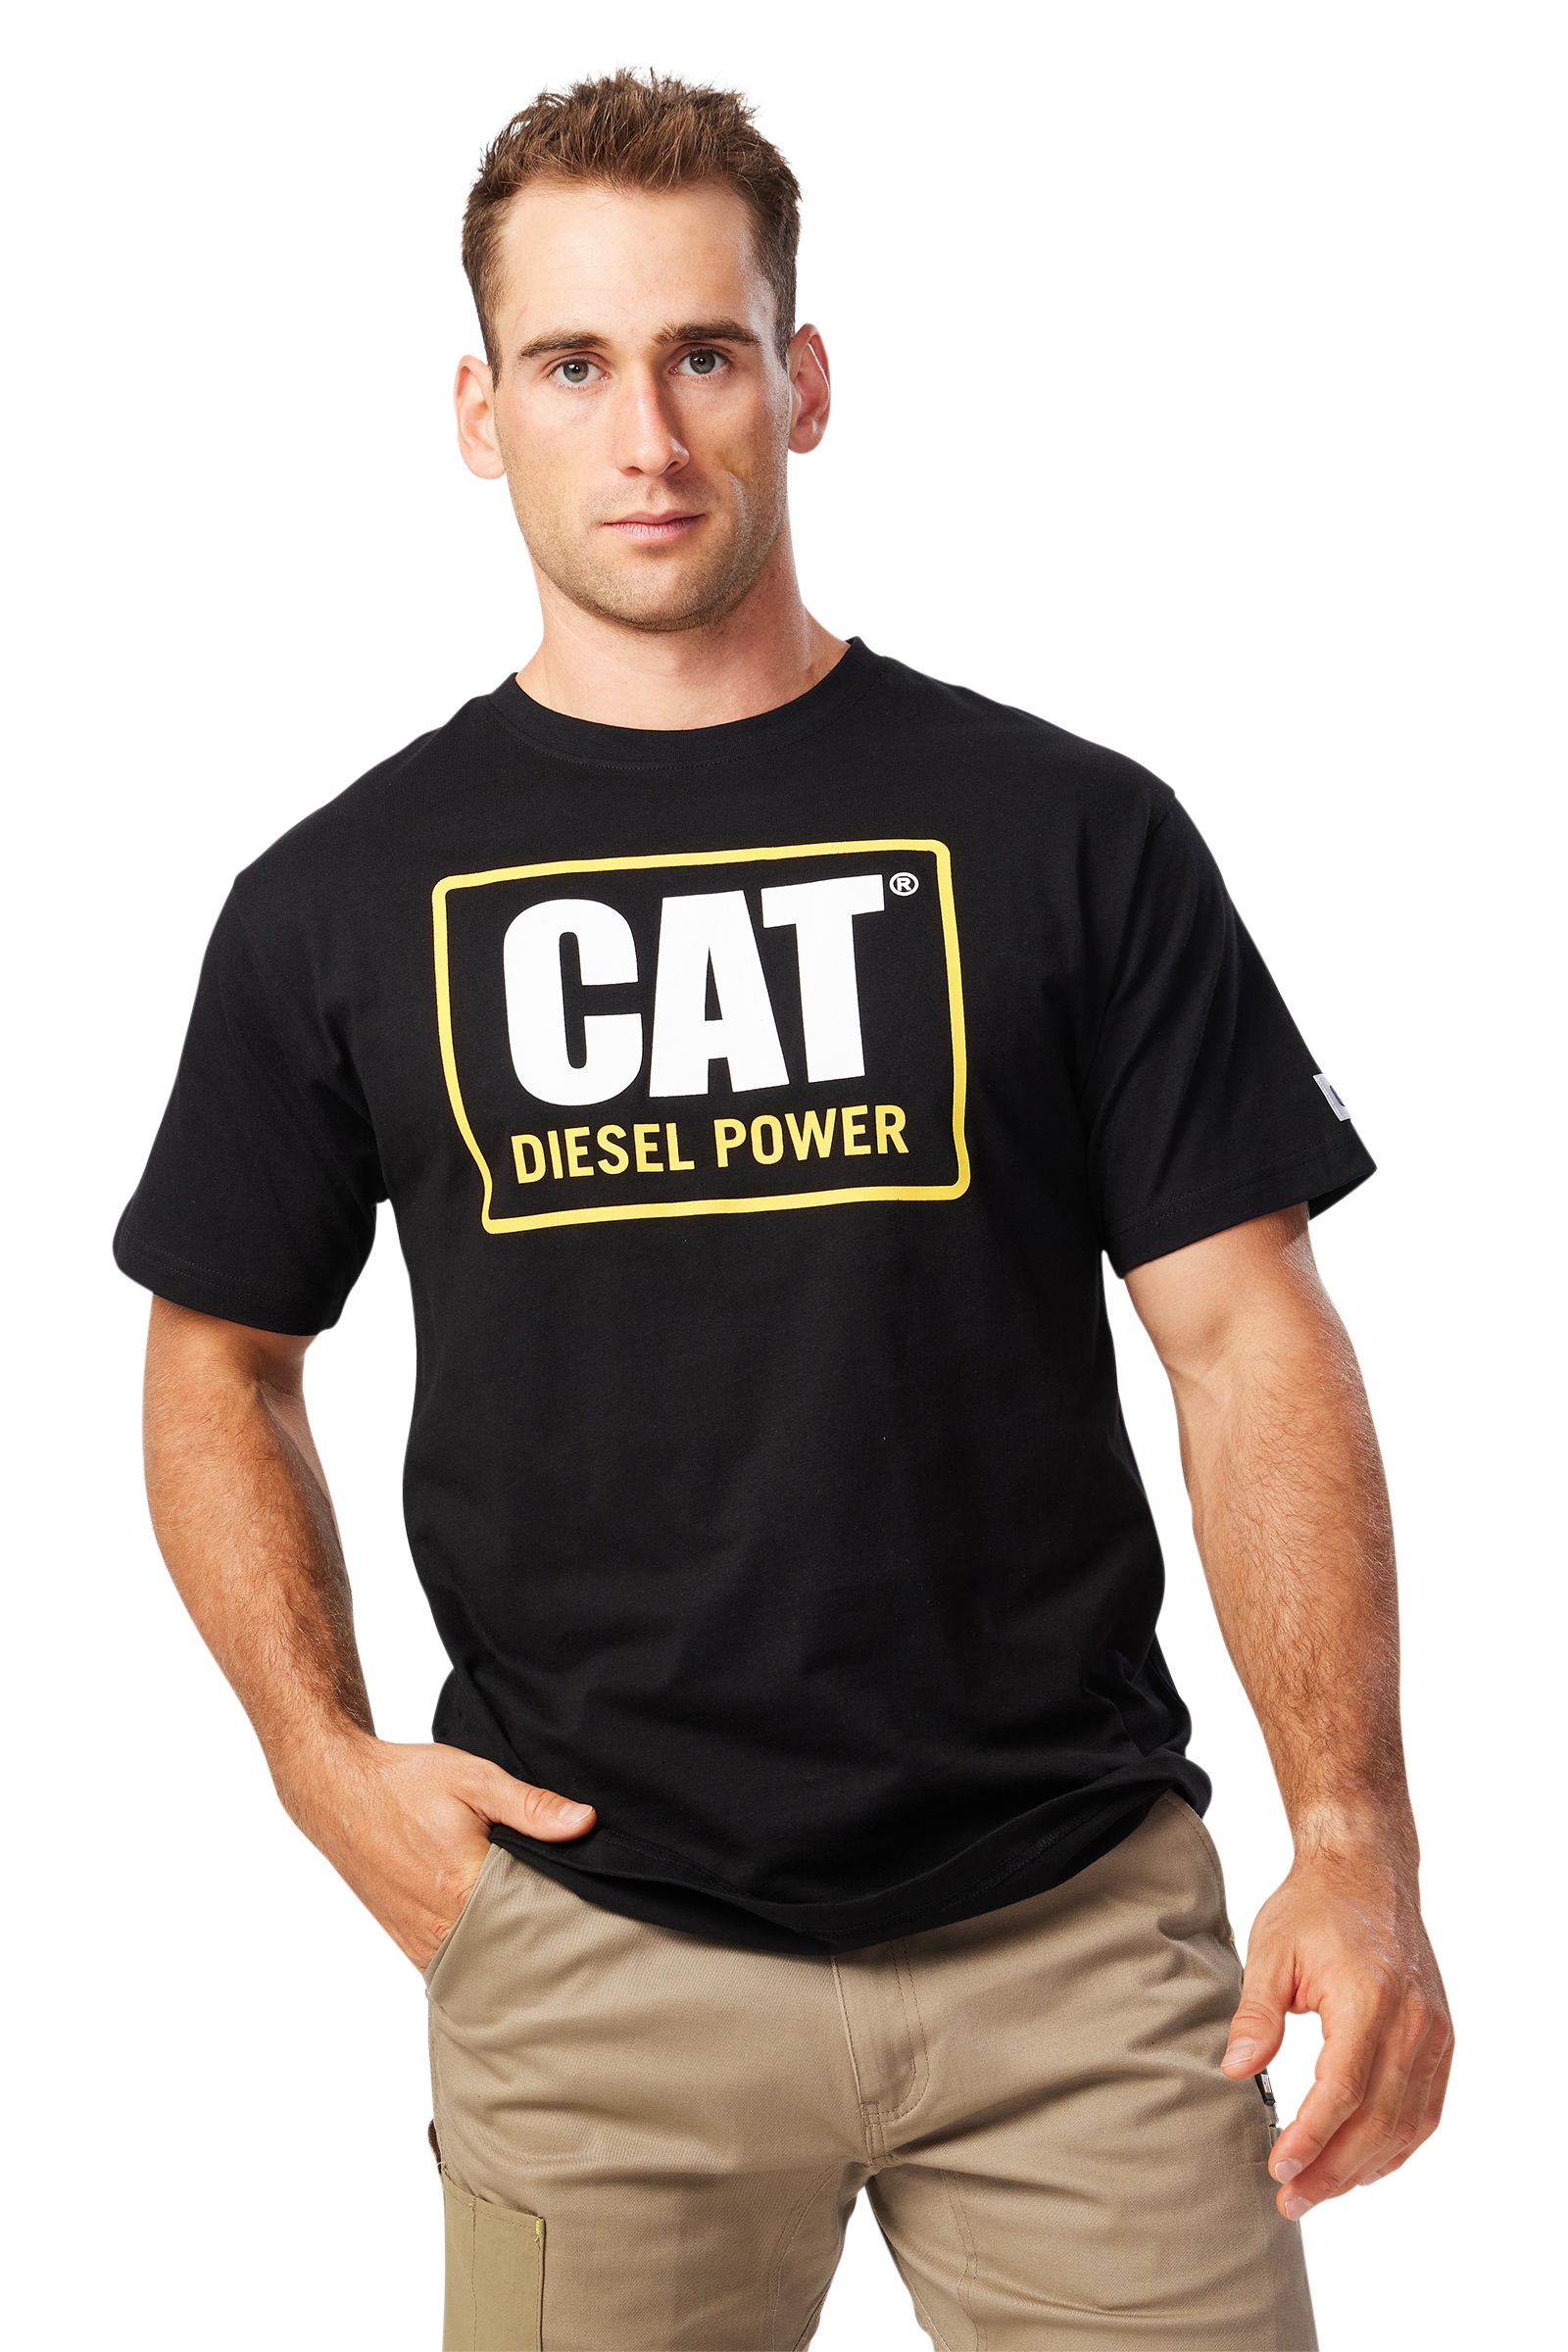 Caterpillar Workwear: Shirts, Pants, Safety Shoes, Boots & More